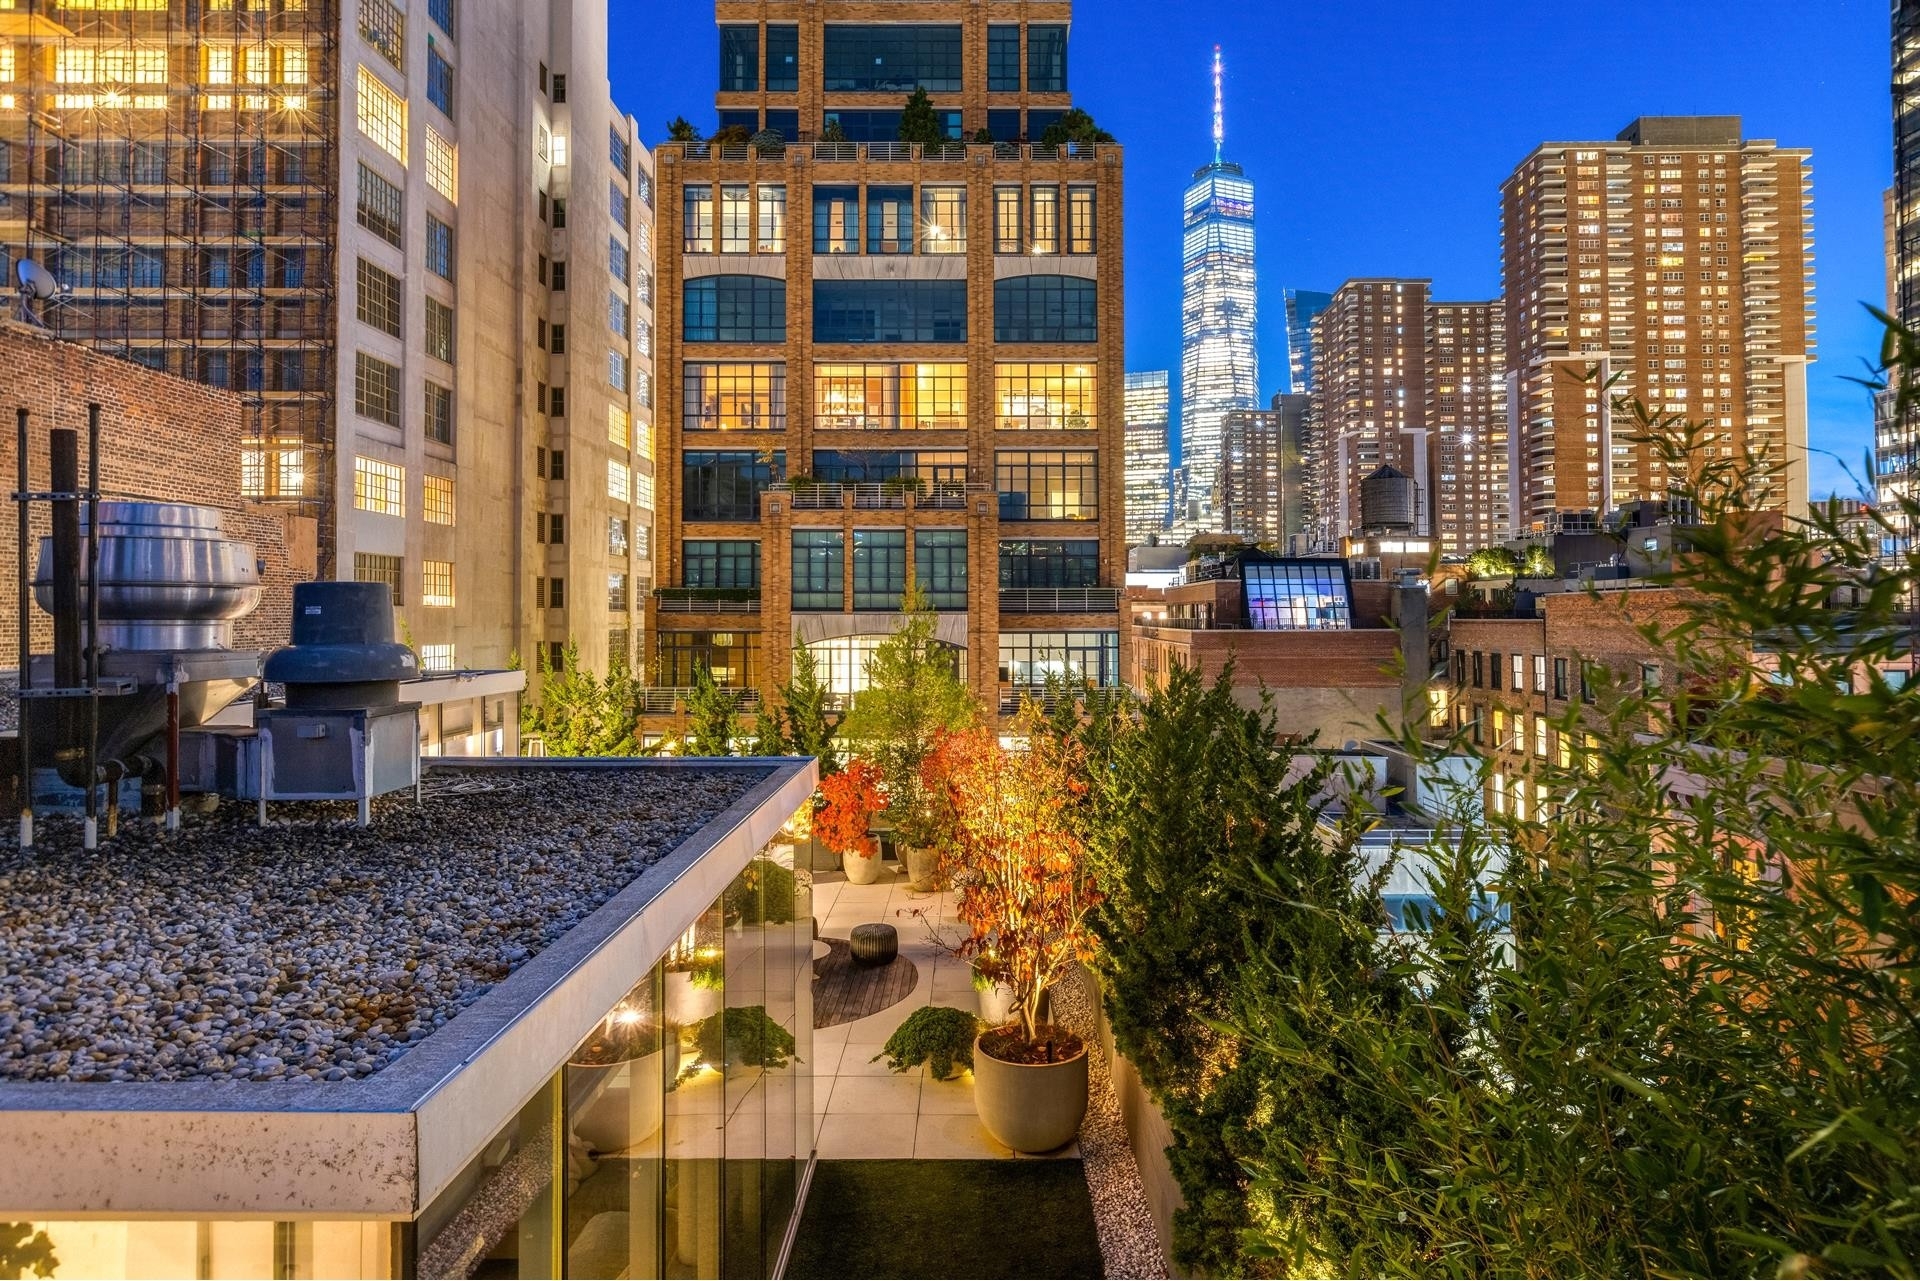 Condominium for Sale at THE AMEX BUILDING, 60 COLLISTER ST, PH TriBeCa, New York, New York 10013